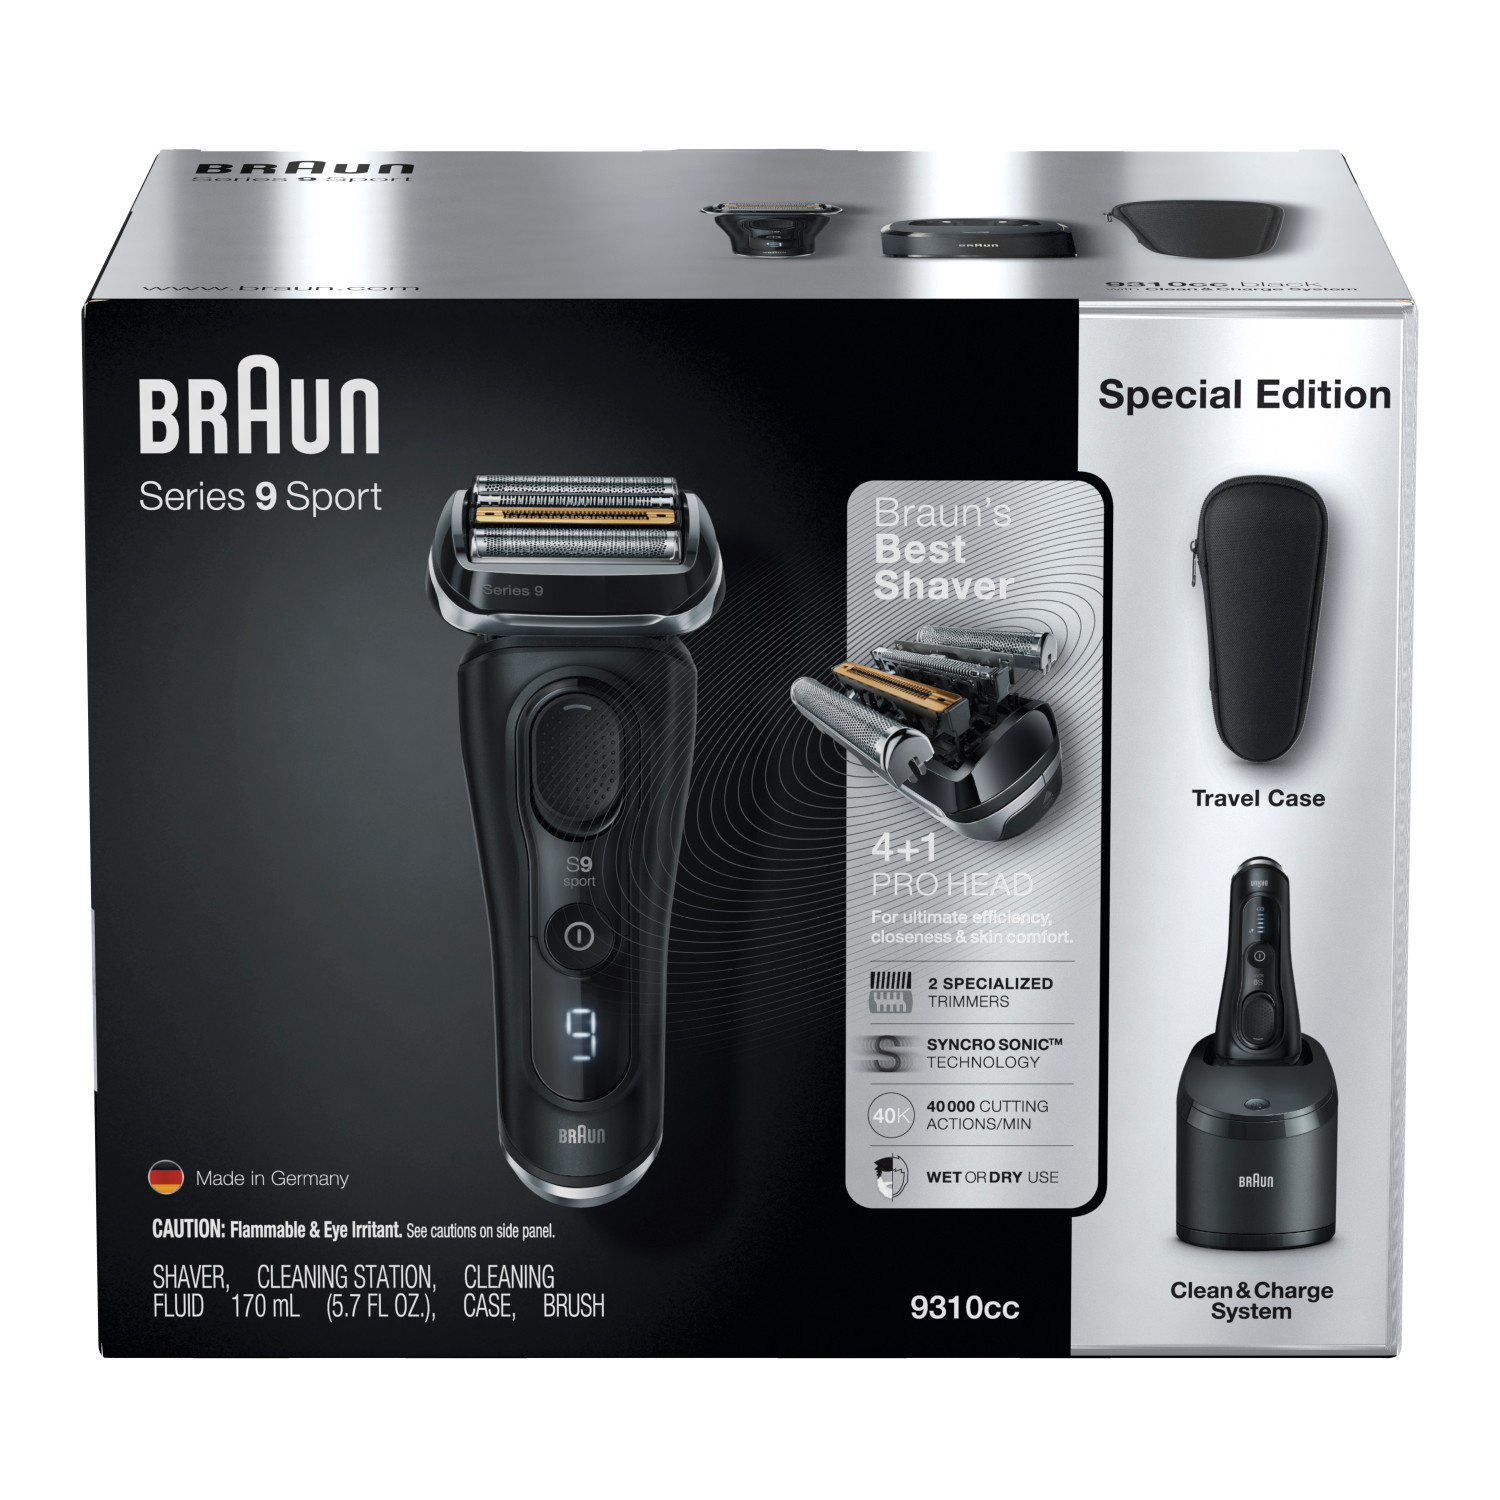 Braun Series 9 Sport Electric Shaver, Rechargeable & Cordless Electric Razor, 9310cc $135